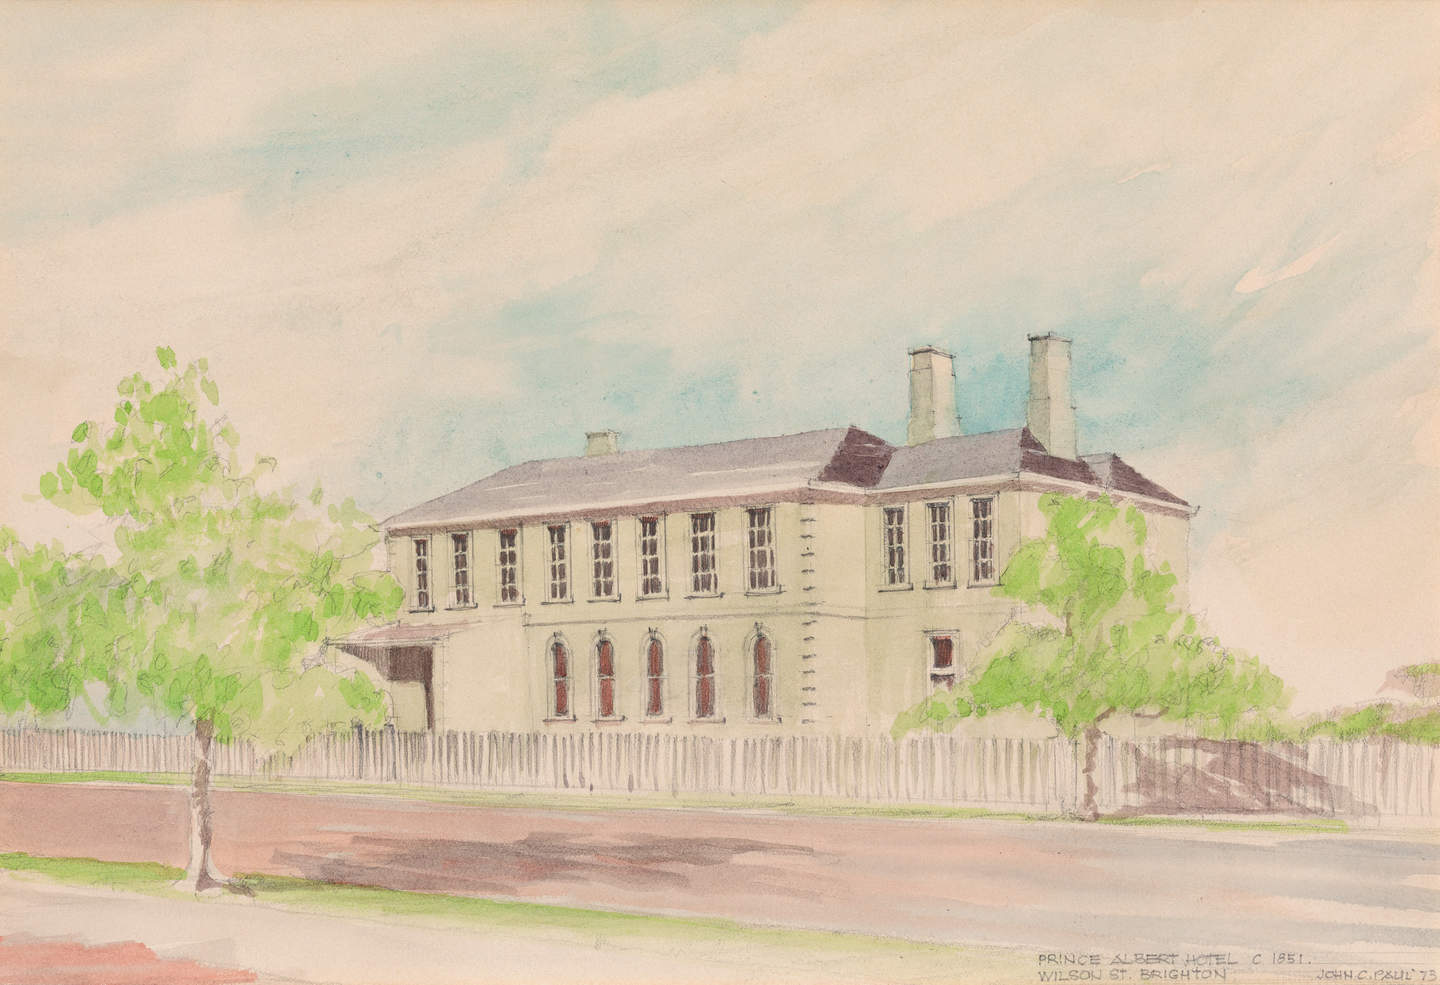 Watercolour of a large double story stone building with two chimneys and many windows along its front side. The house has a white picket fence and is painted from the opposite side of the road.